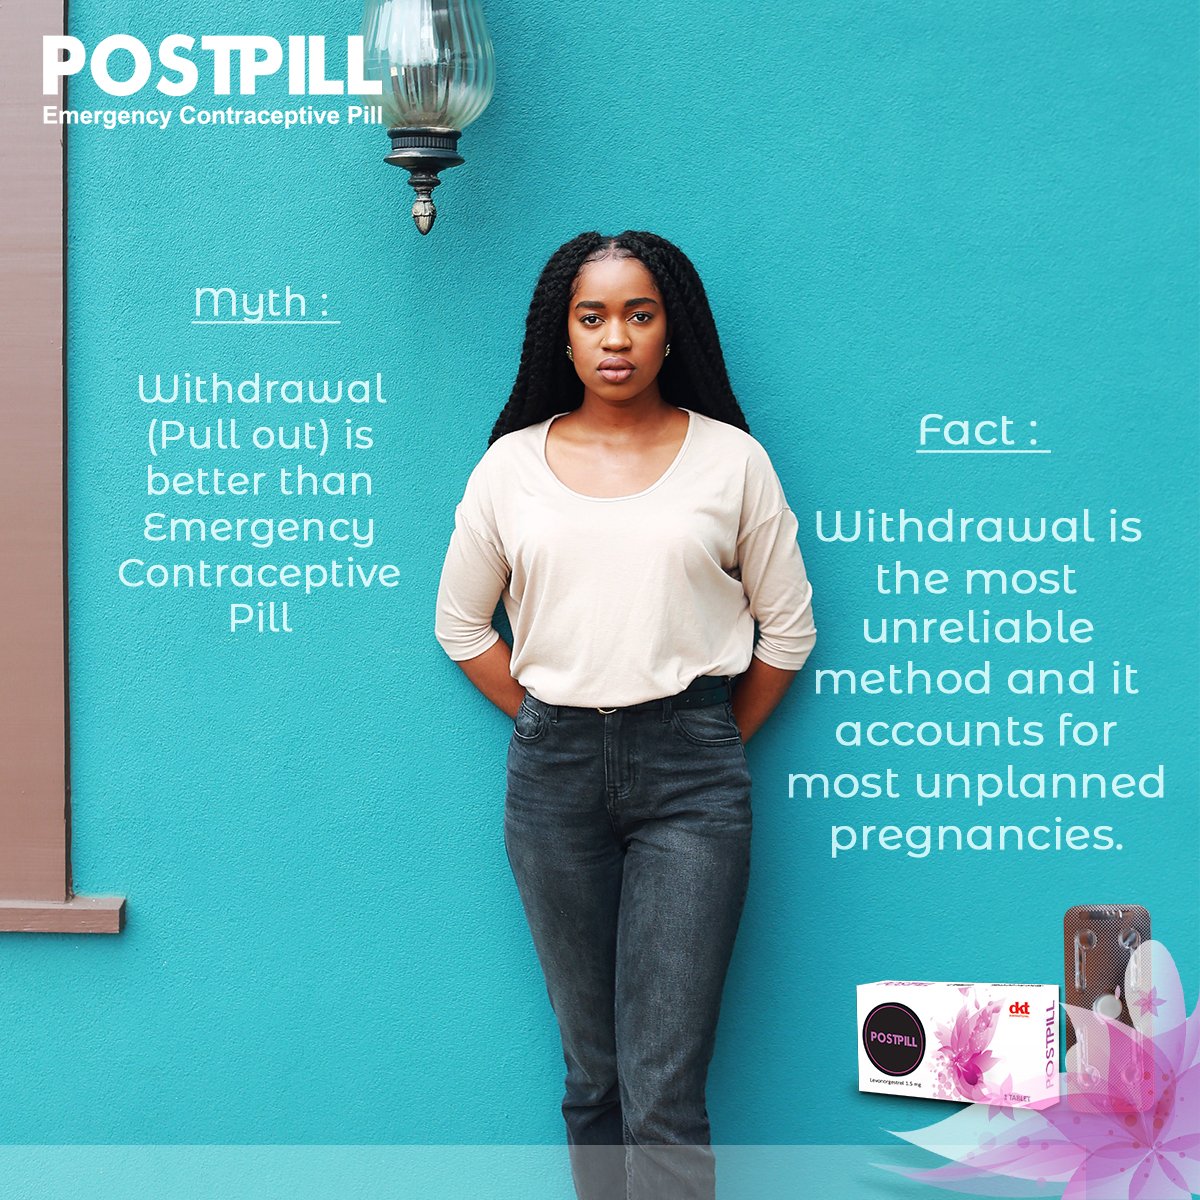 #Withdrawal (pull-out) is the most unreliable method and it accounts for most #unwantedpregnancies. Don't be a #doubtingthomas when it comes to #Postpill